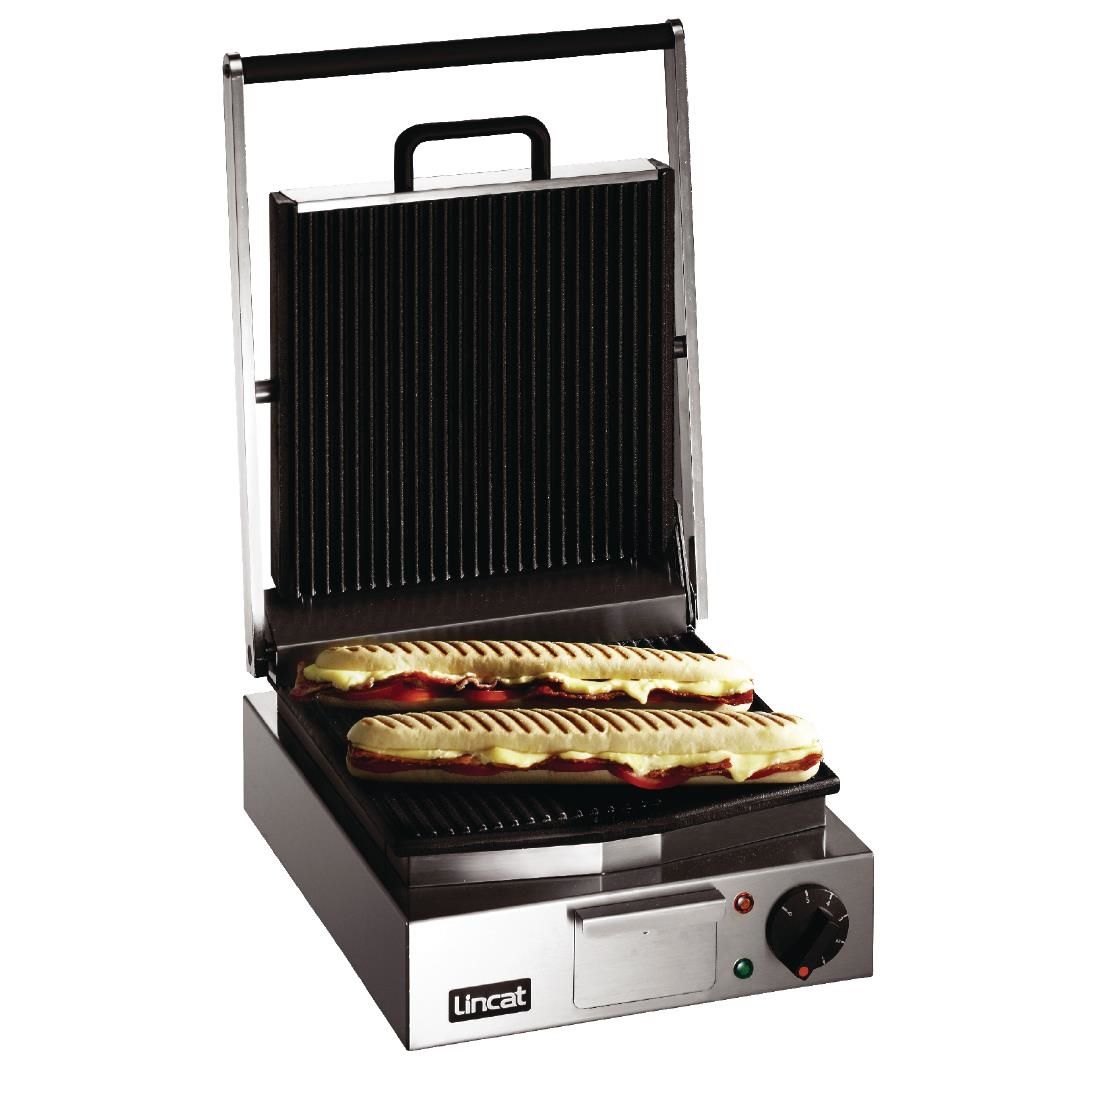 LPG - Lincat Lynx 400 Electric Counter-top Single Panini Grill - Ribbed Upper & Lower Plates - W 310 mm - 2.25 kW CD423 JD Catering Equipment Solutions Ltd